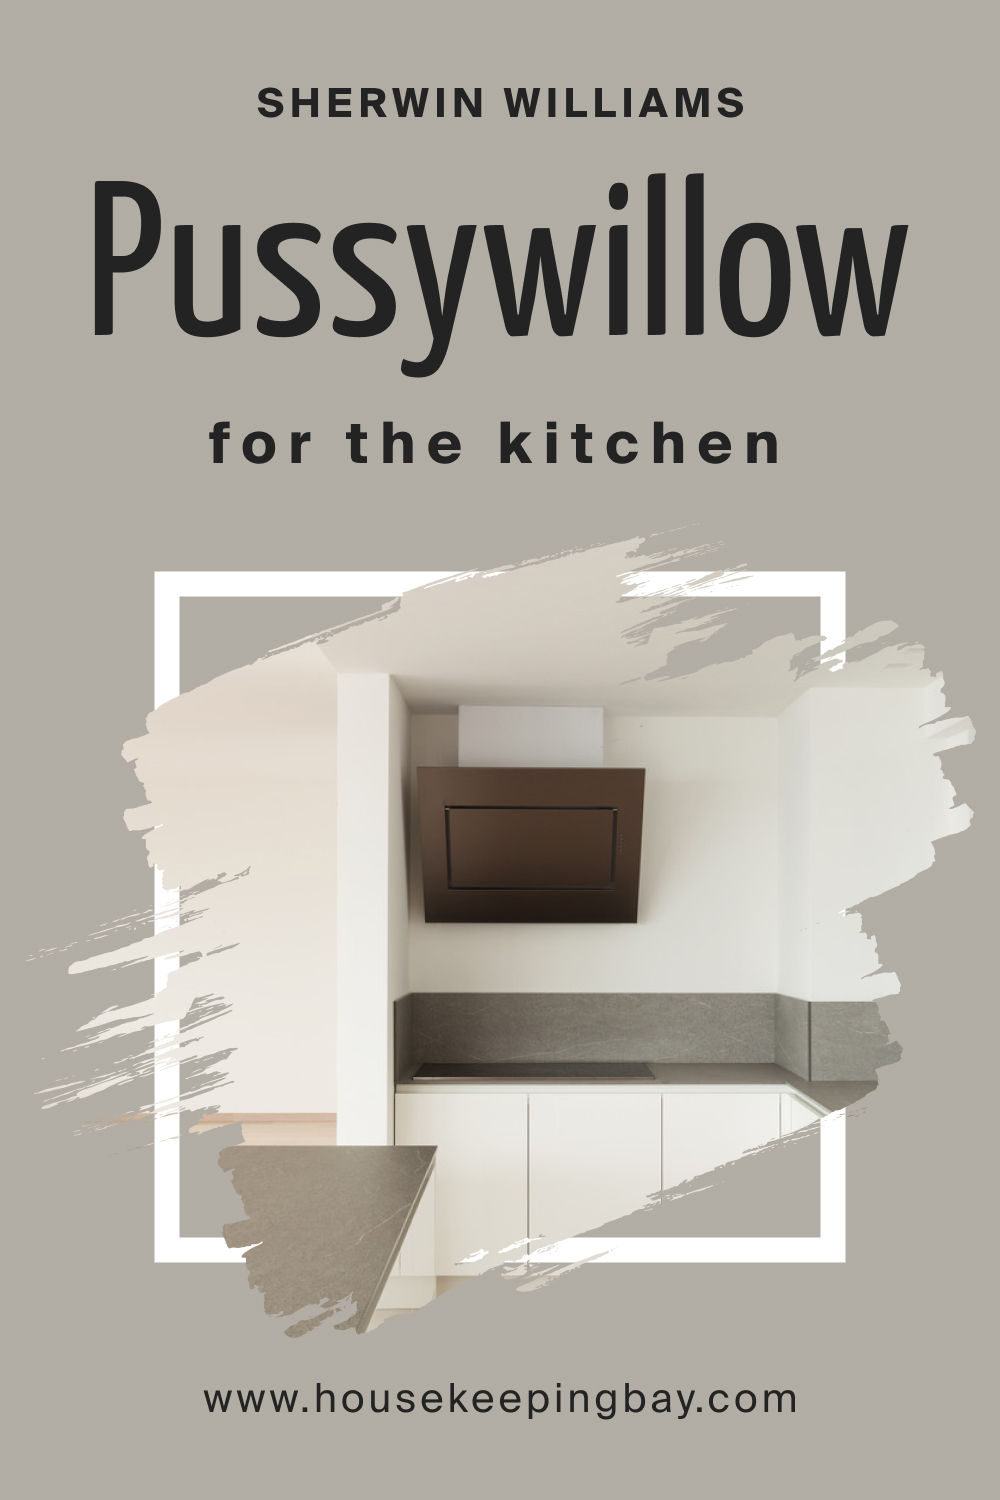 Sherwin Williams. Pussywillow SW 7643 For the Kitchen